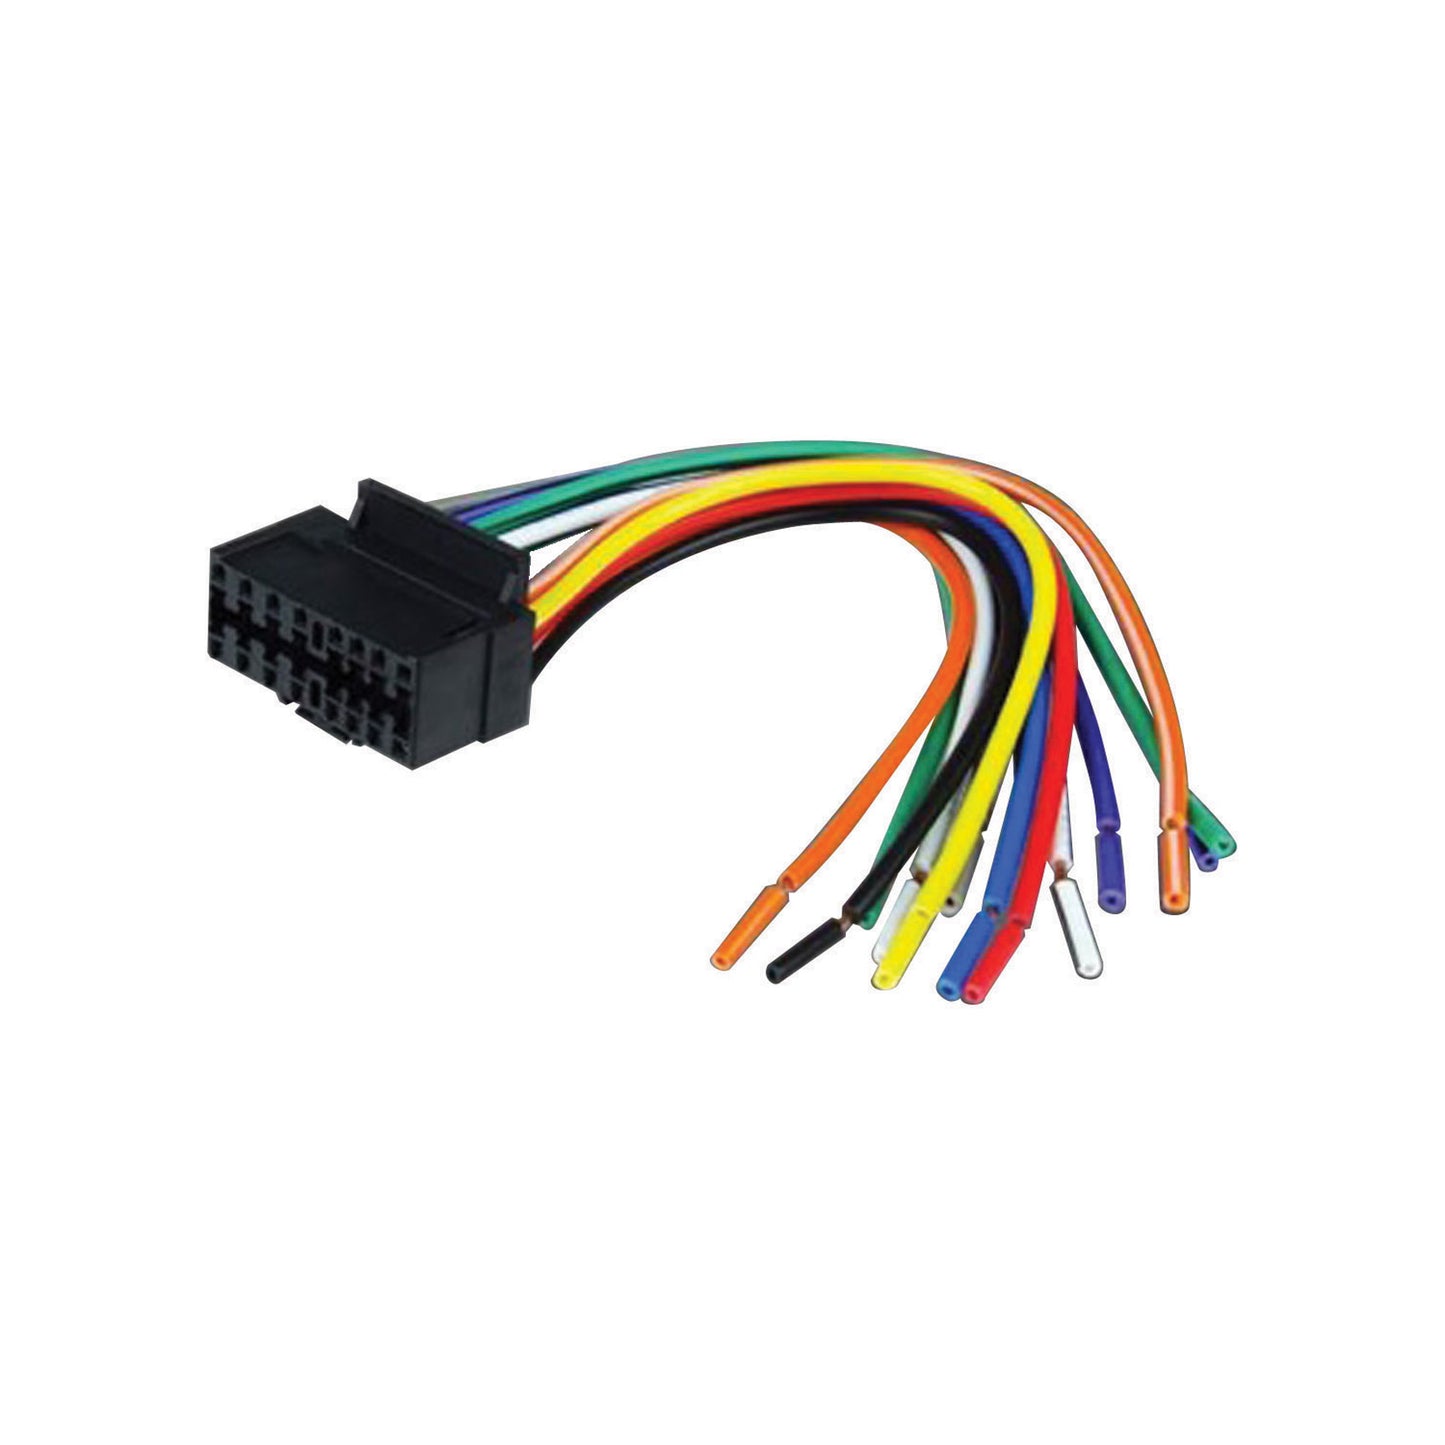 Nippon Pipeman 16 Pin Wiring Harness For 2000+ Jvc